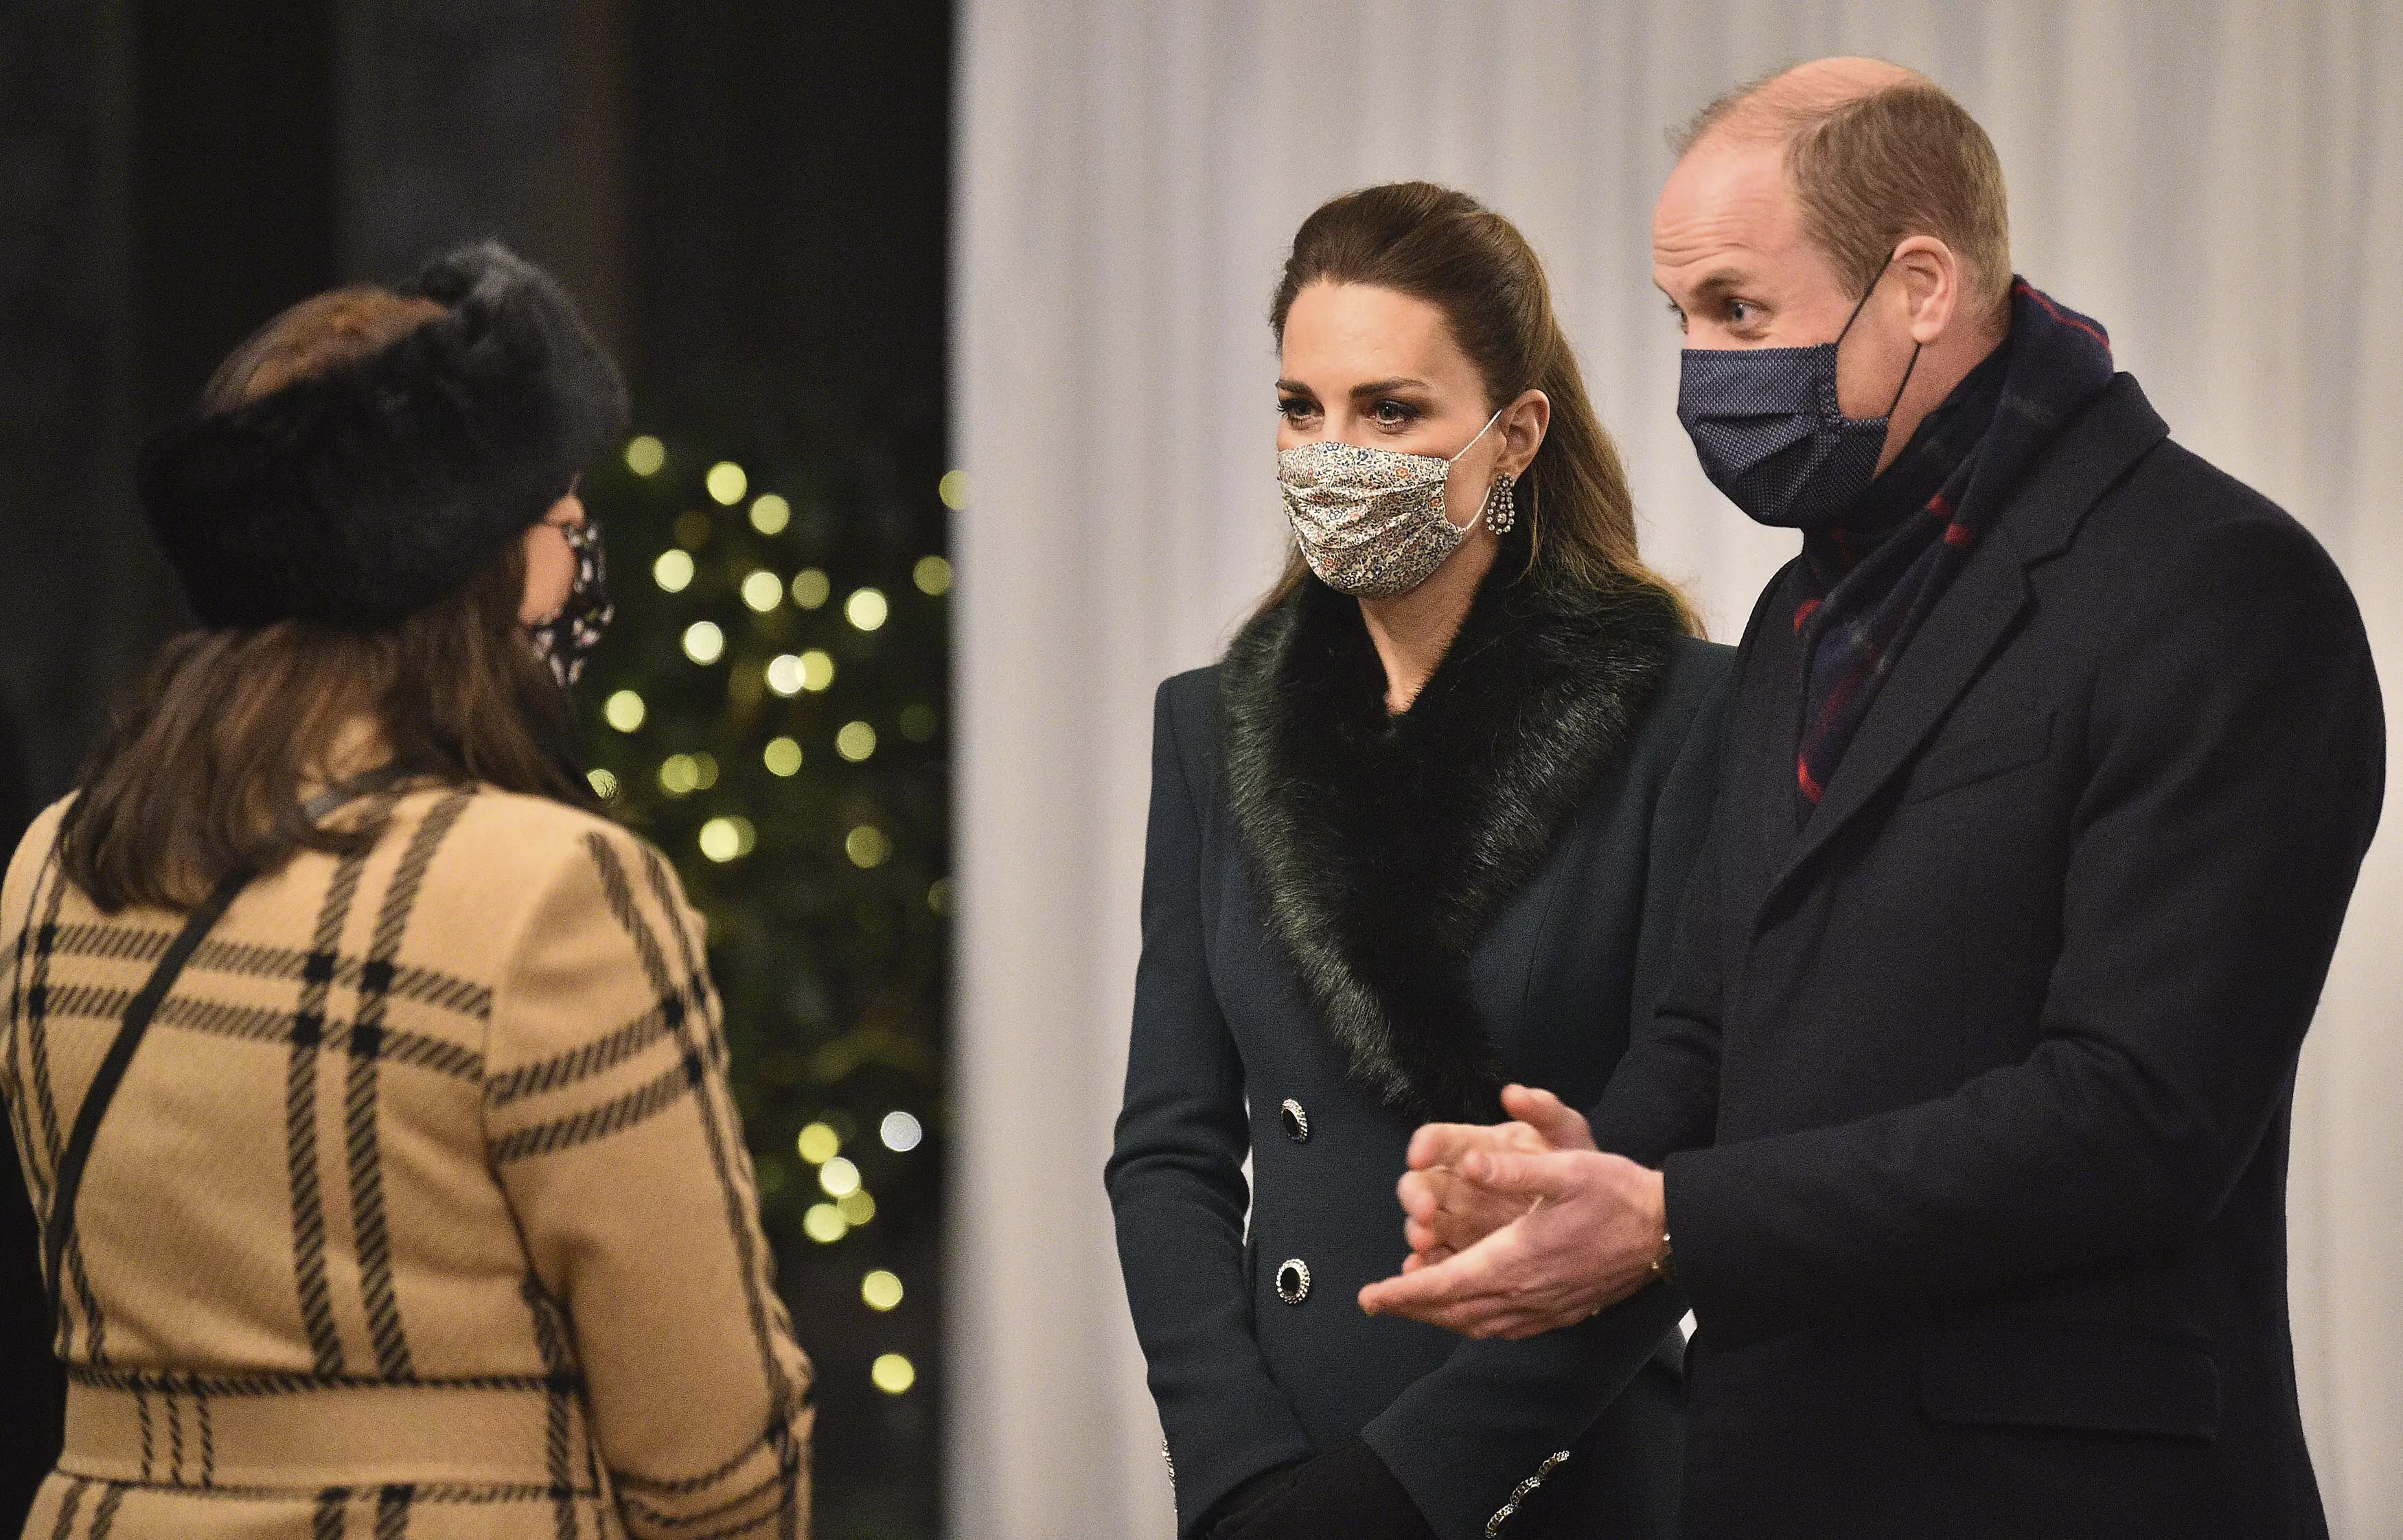 Wills and Kate are also uncertain of their Christmas plans (